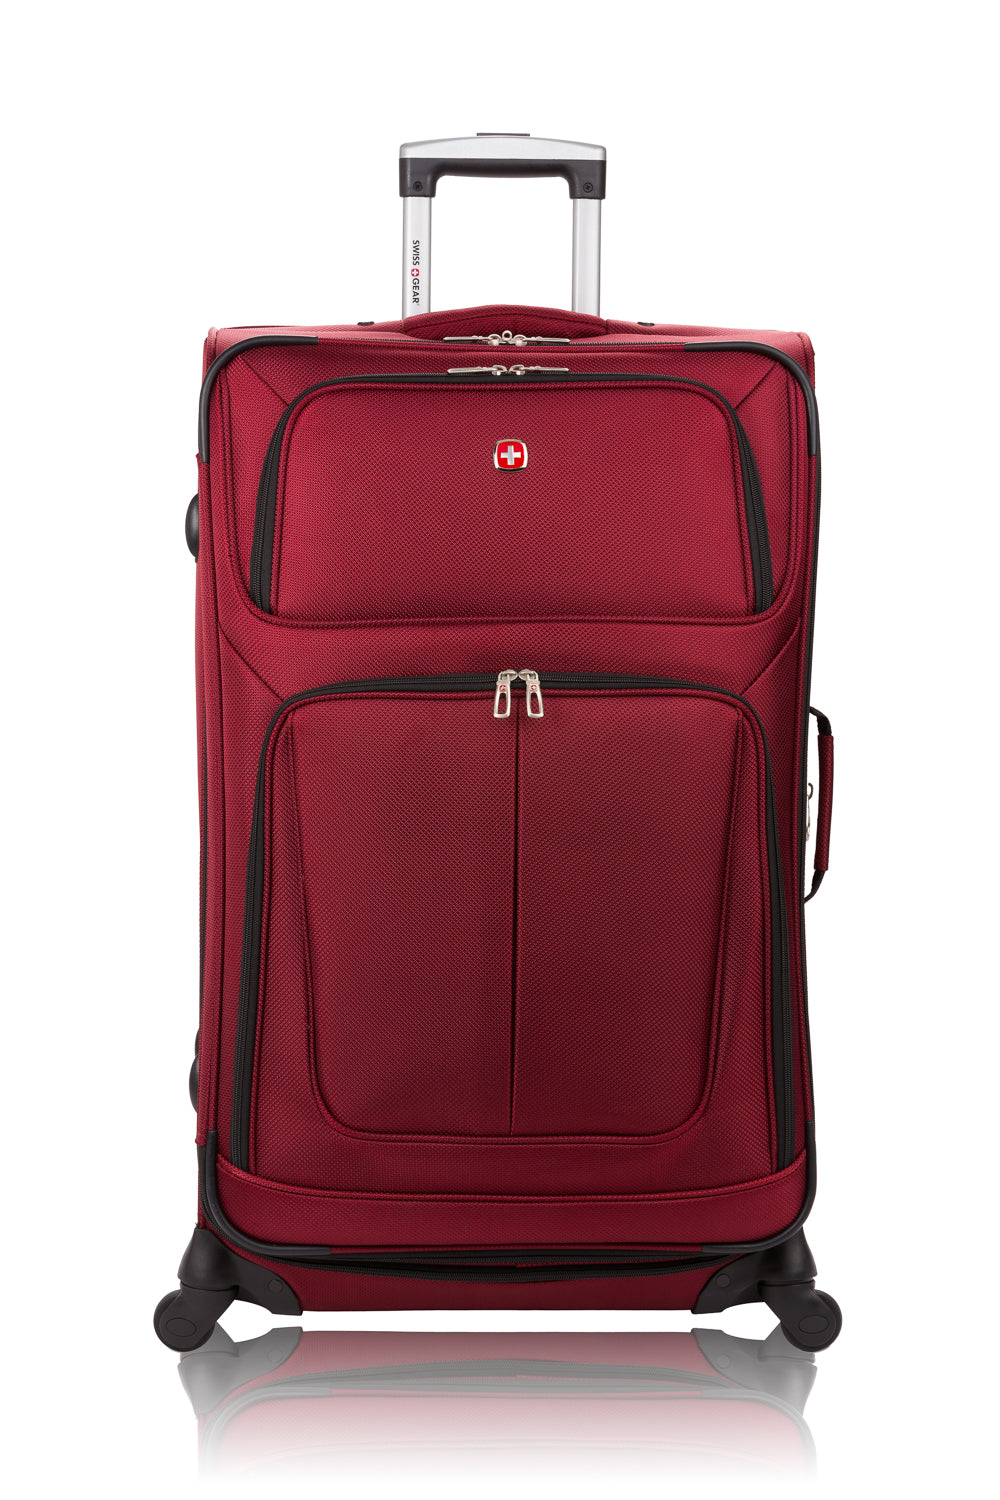 Swissgear 6283 29" Expandable Spinner Suitcase